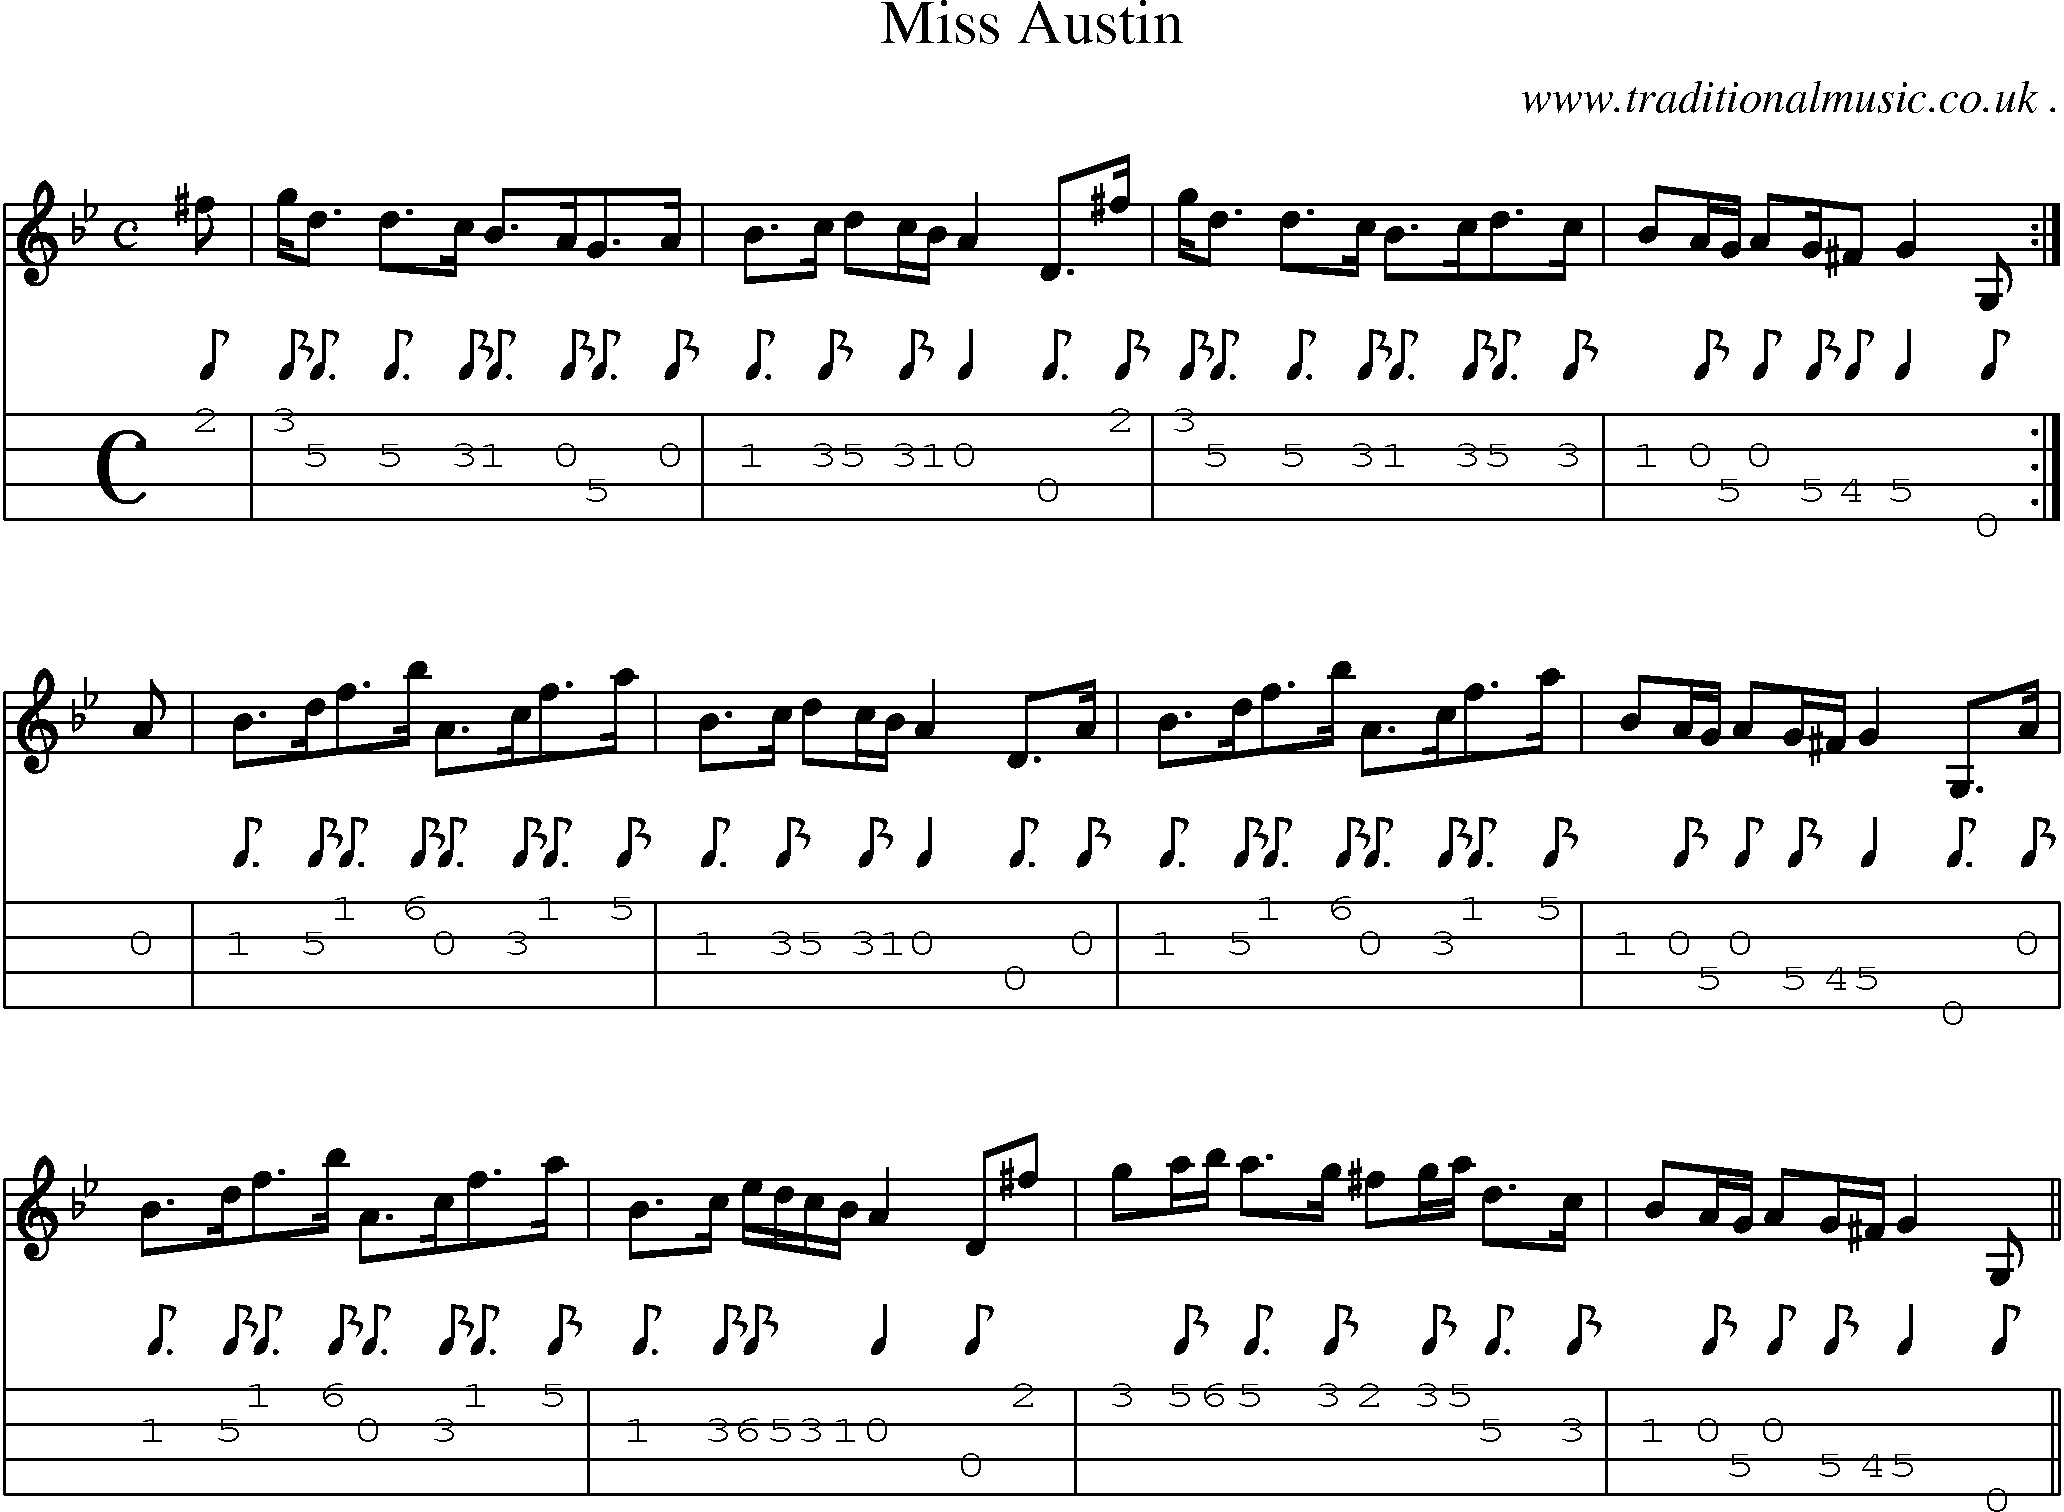 Sheet-music  score, Chords and Mandolin Tabs for Miss Austin